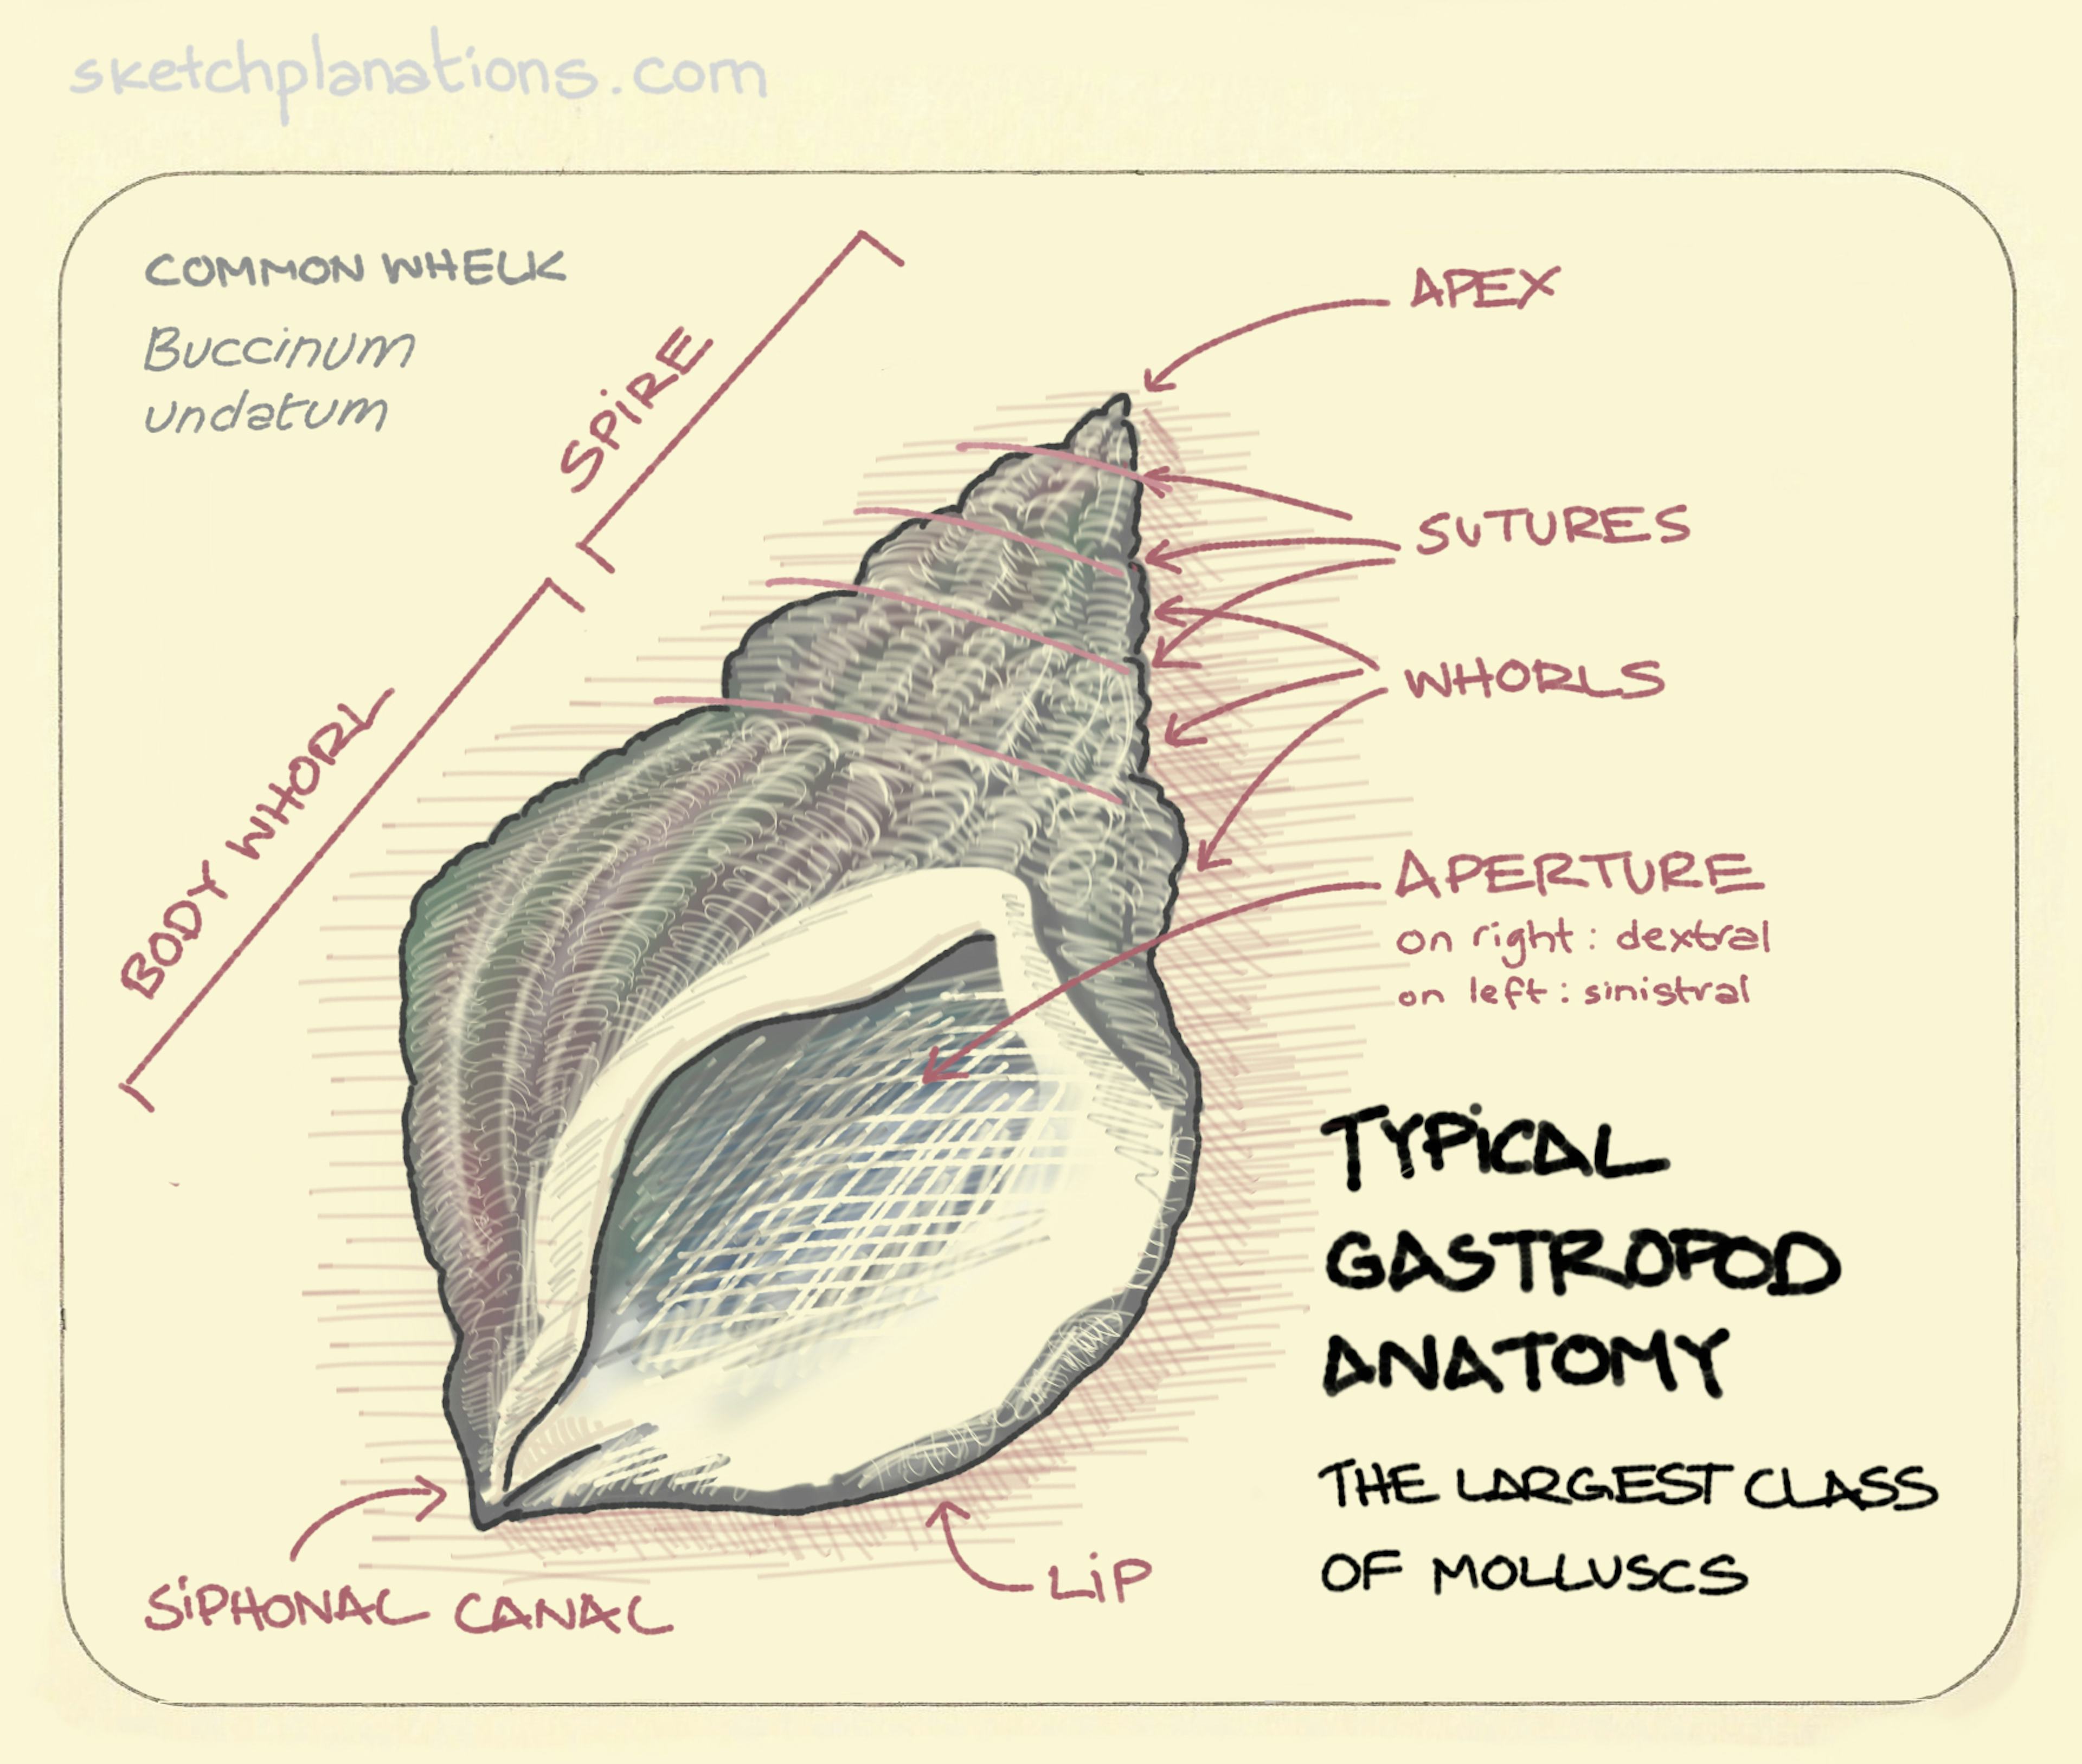 Typical gastropod anatomy: identifying the main parts of the shell of a common whelk